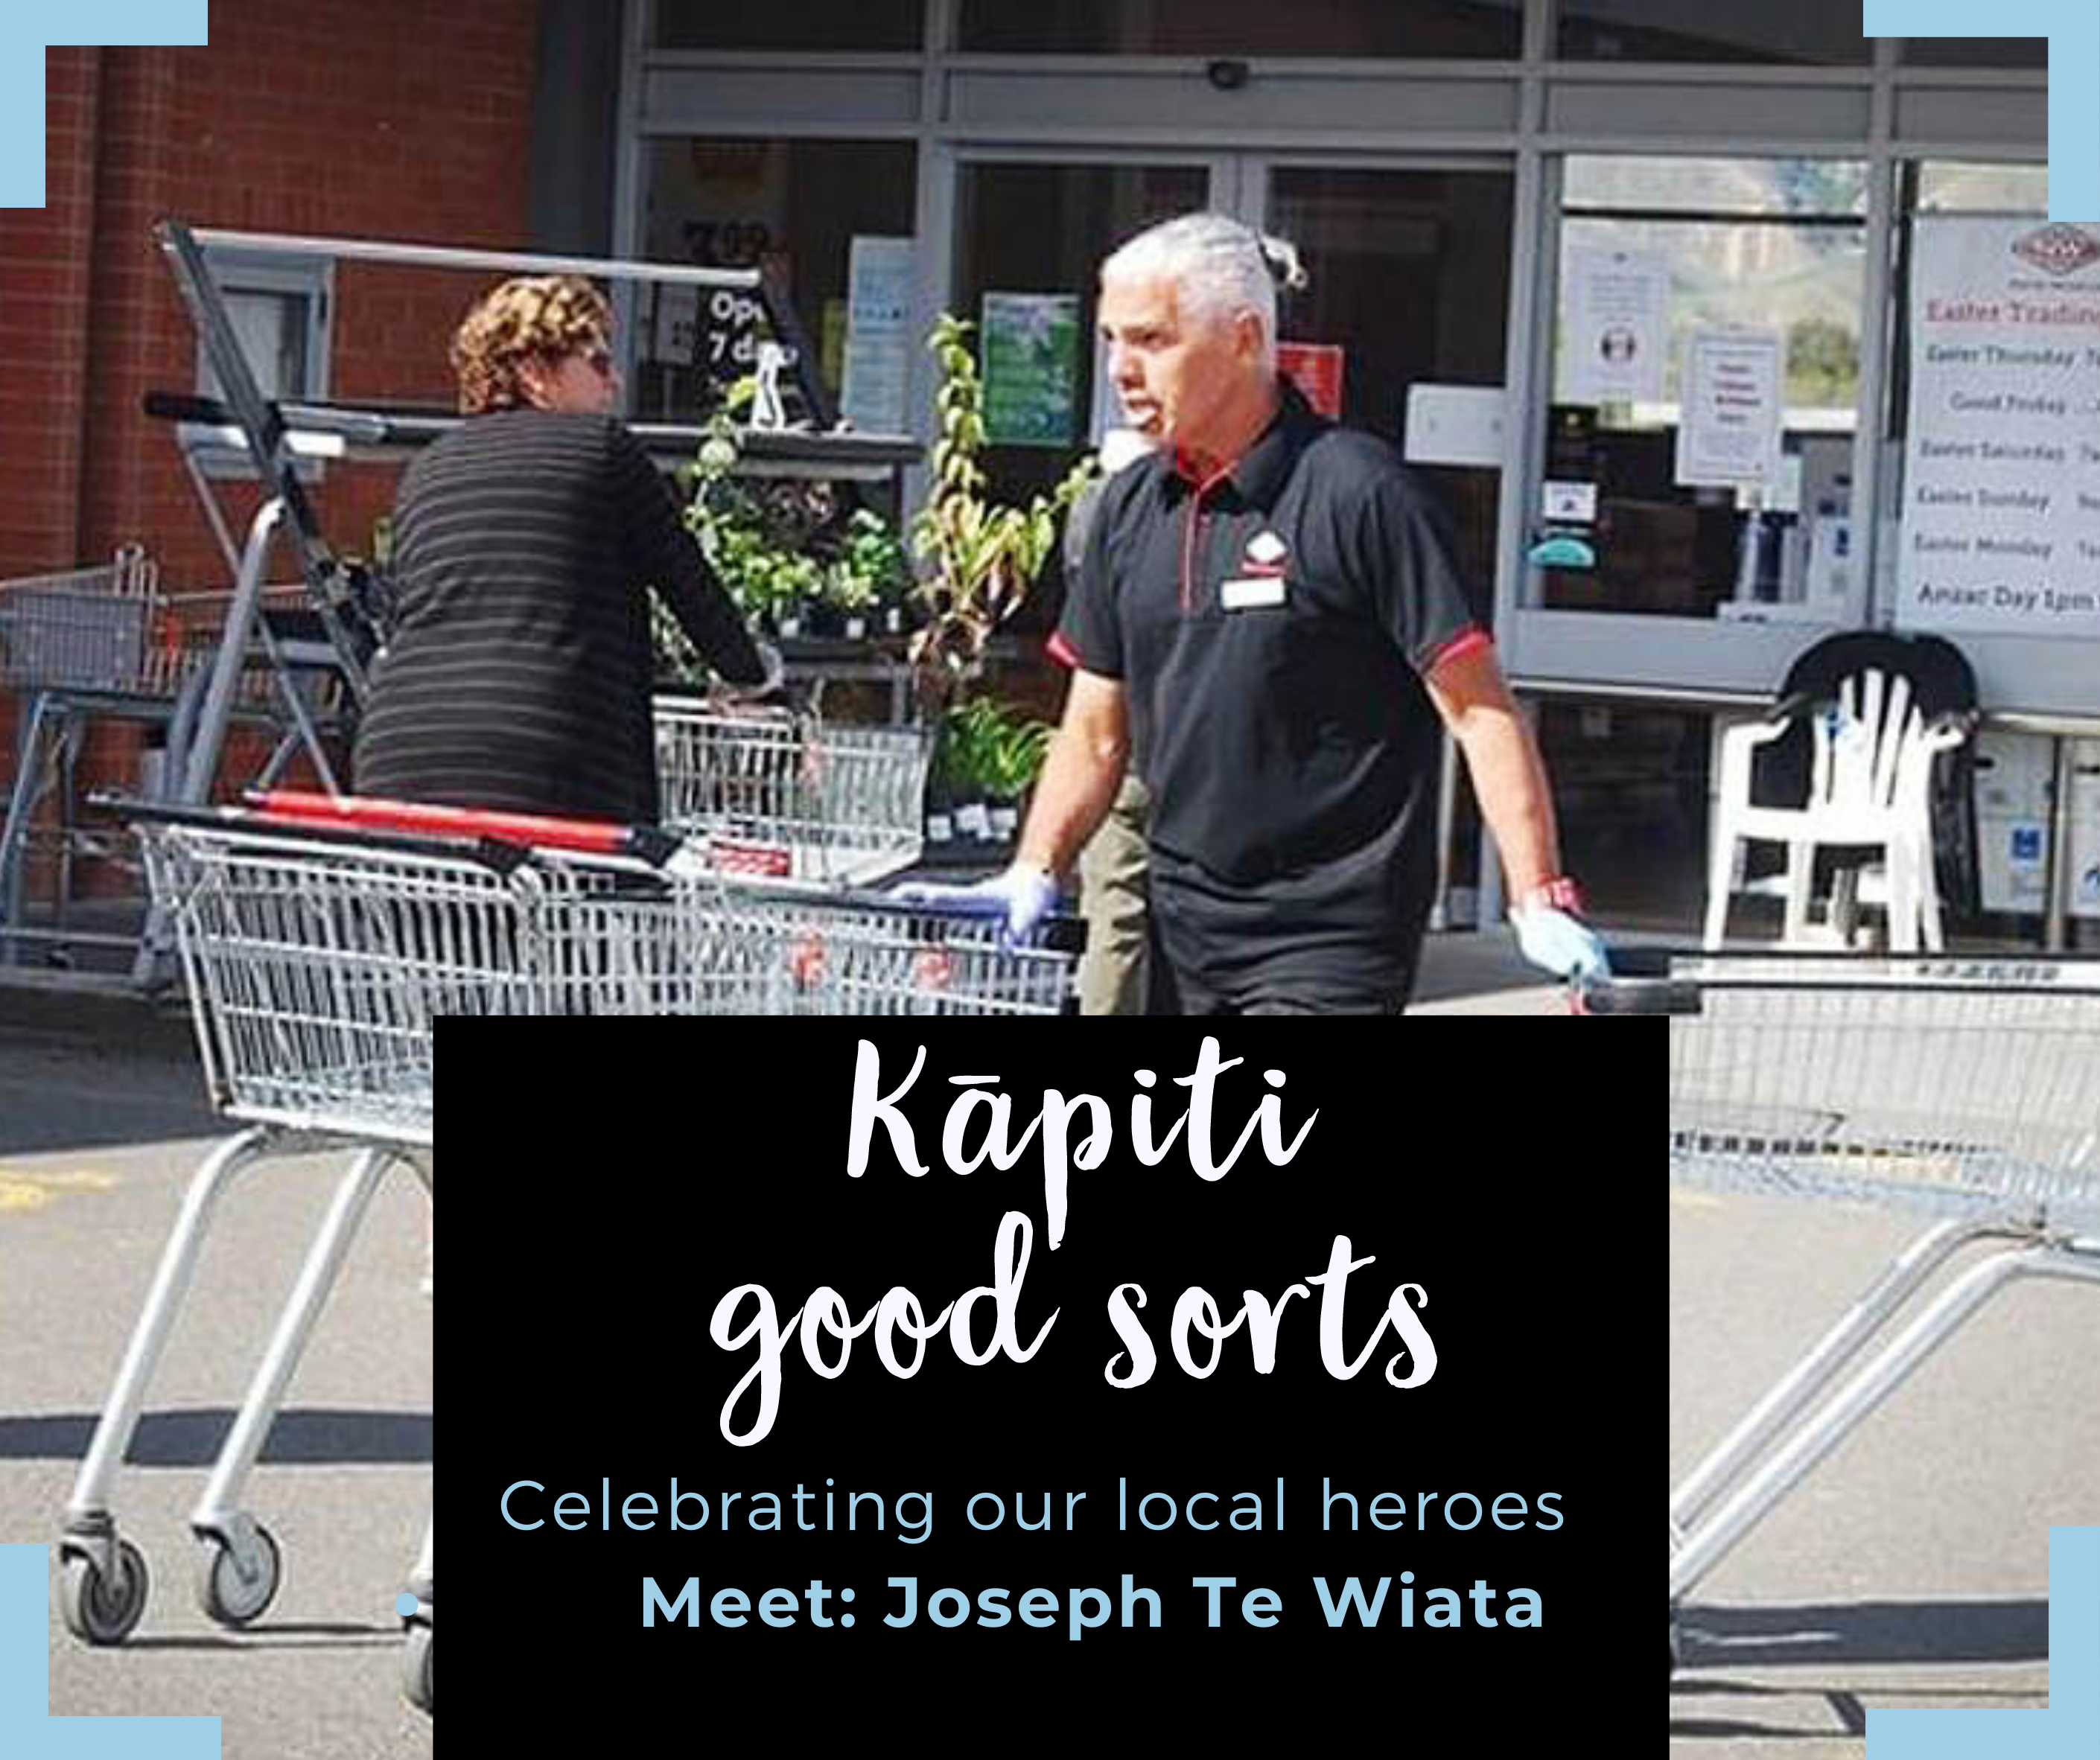 Photo of good sort Joseph Te Wiata out and about in the community